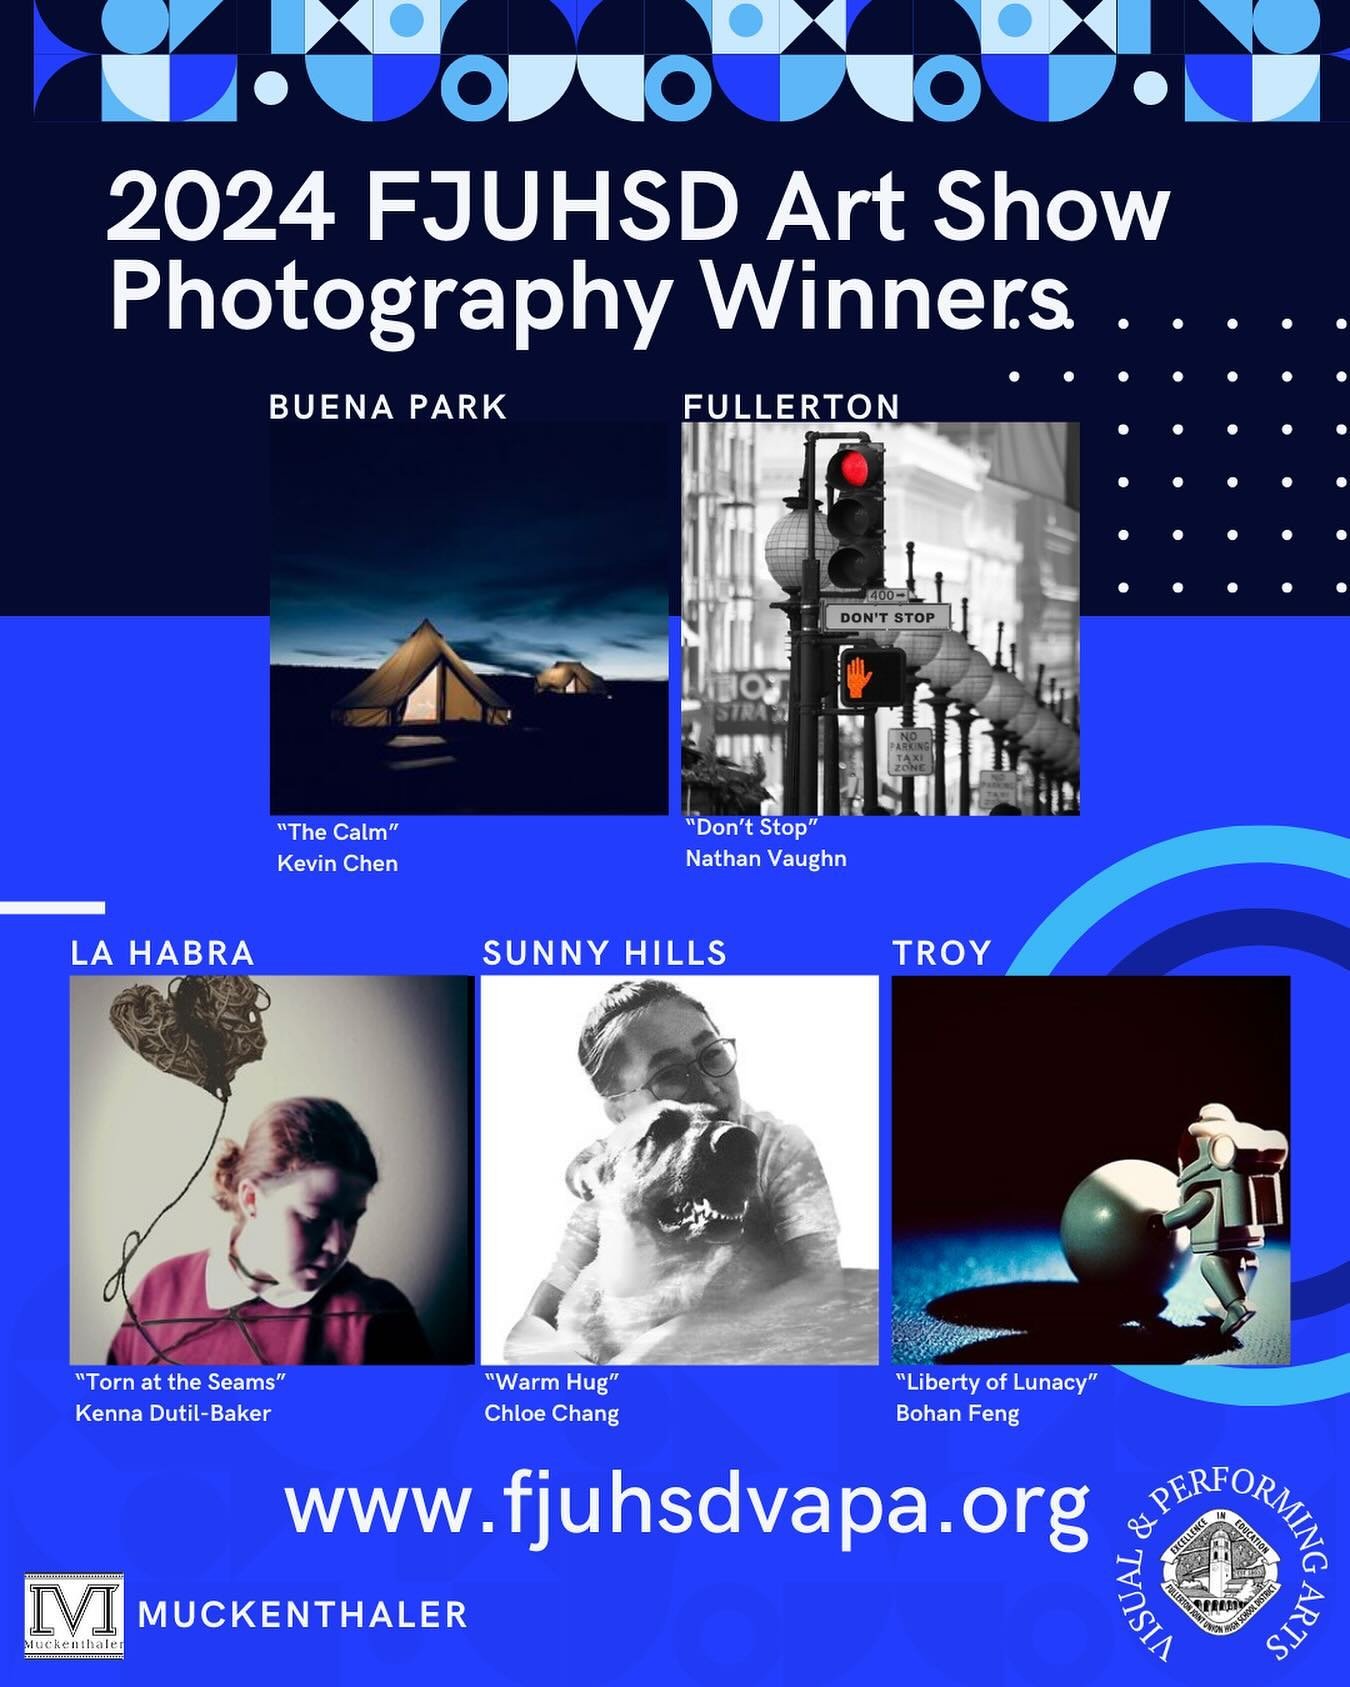 Congrats to the winners and everyone who participated. Beautiful work. @fjuhsd_vapa @la_habra_hs